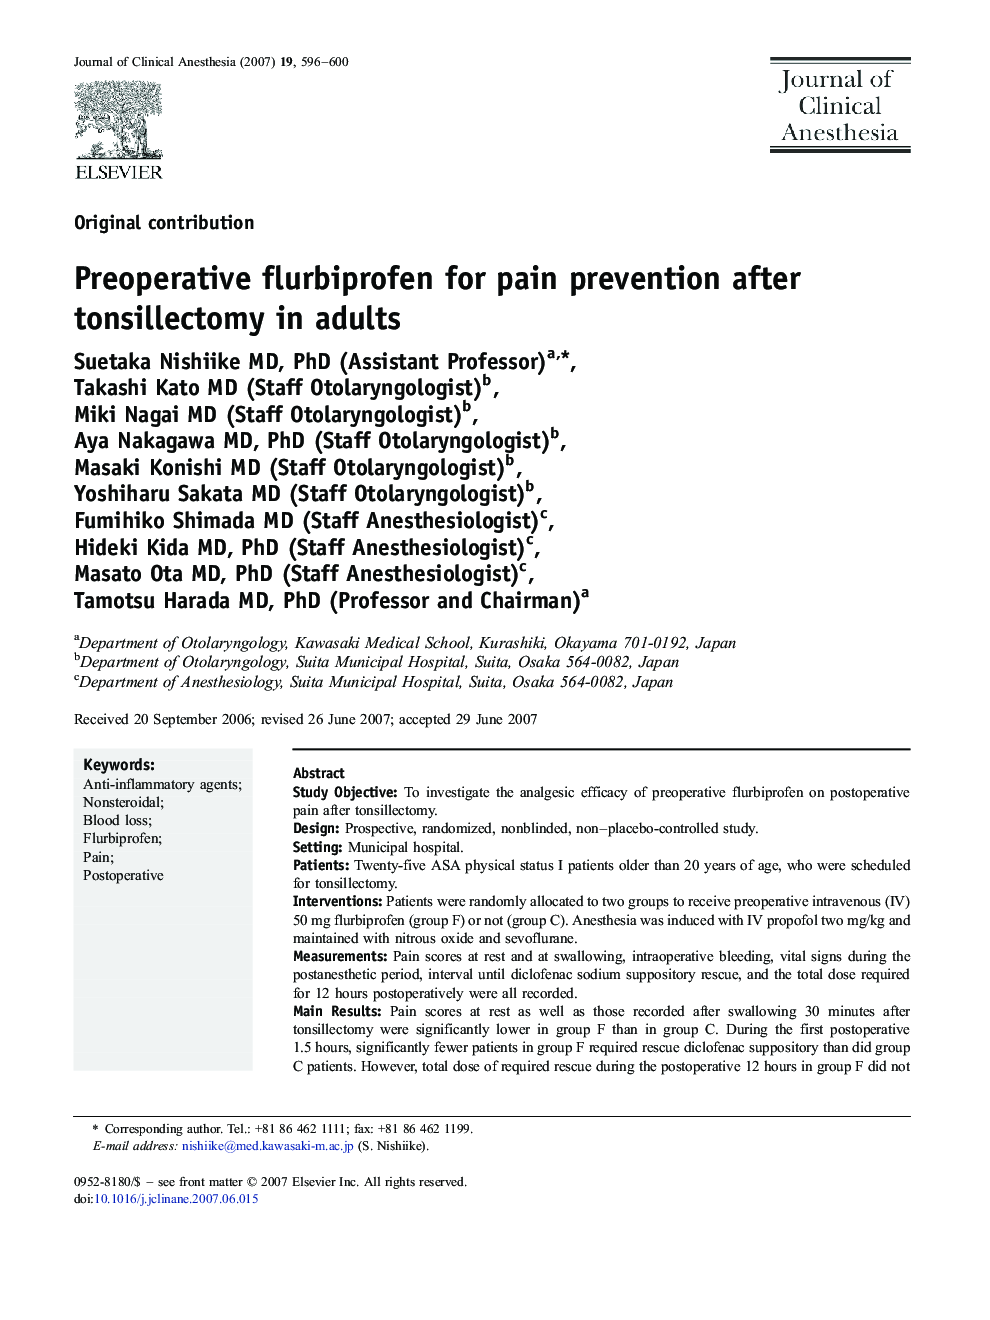 Preoperative flurbiprofen for pain prevention after tonsillectomy in adults